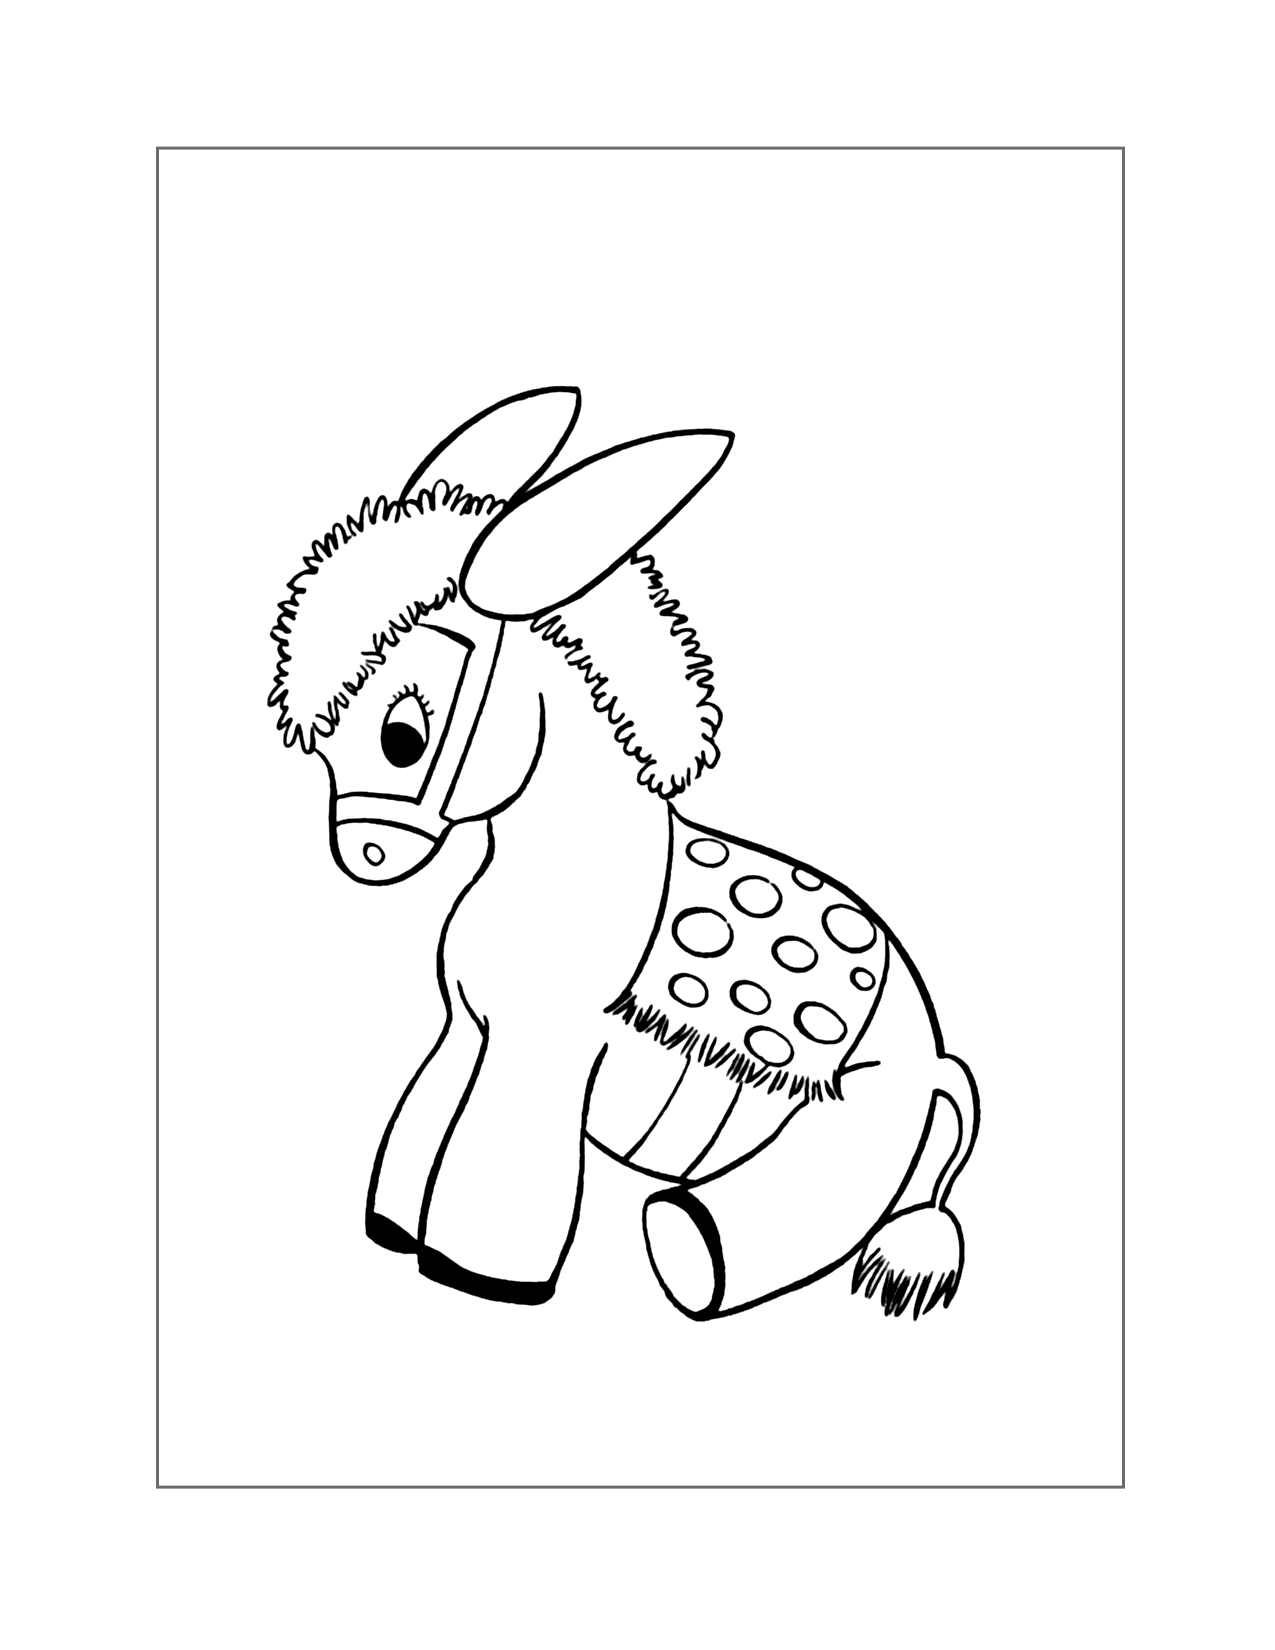 Donkey Toy Coloring Page